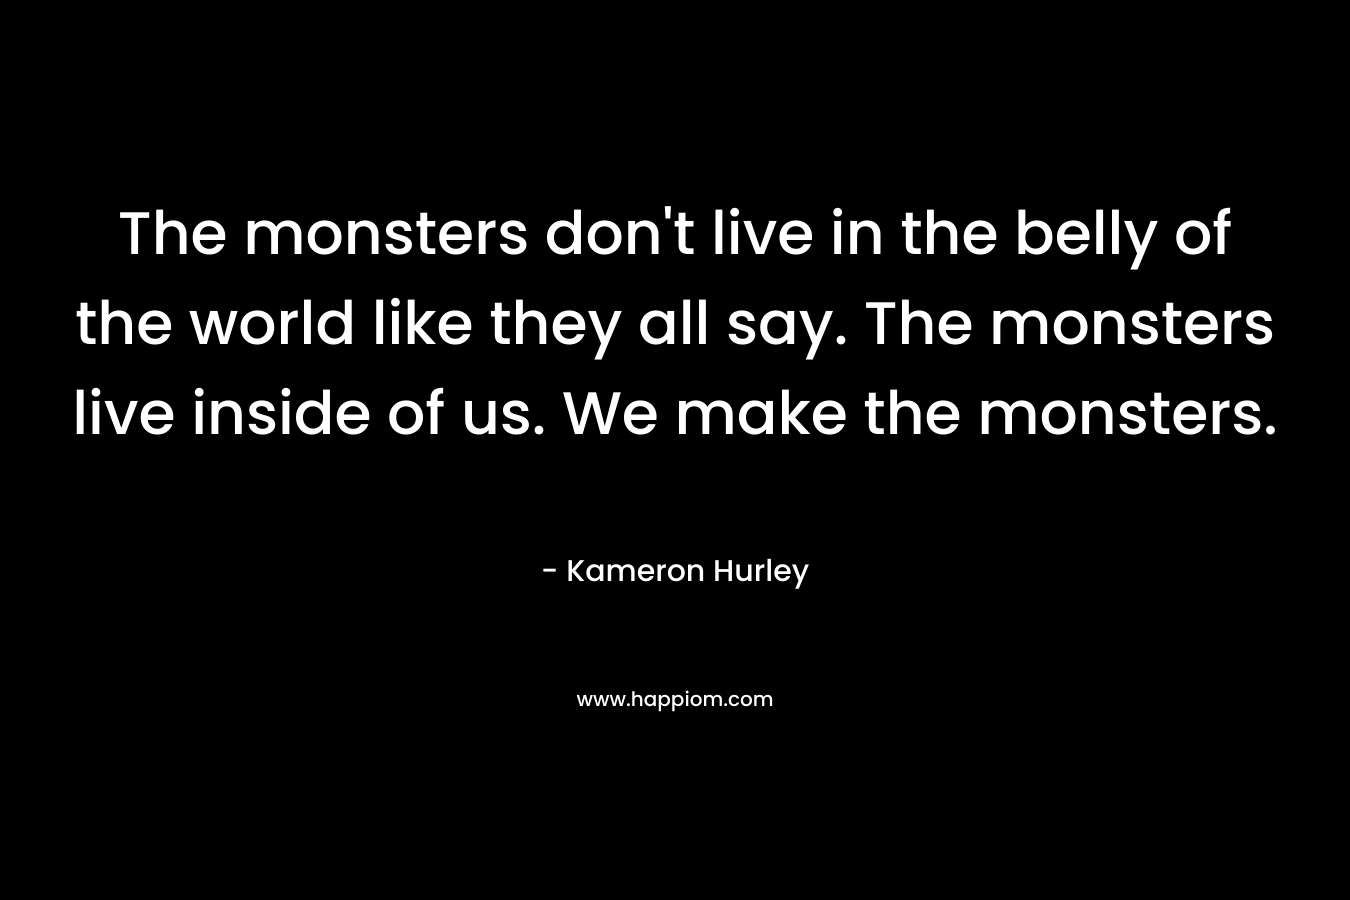 The monsters don't live in the belly of the world like they all say. The monsters live inside of us. We make the monsters.